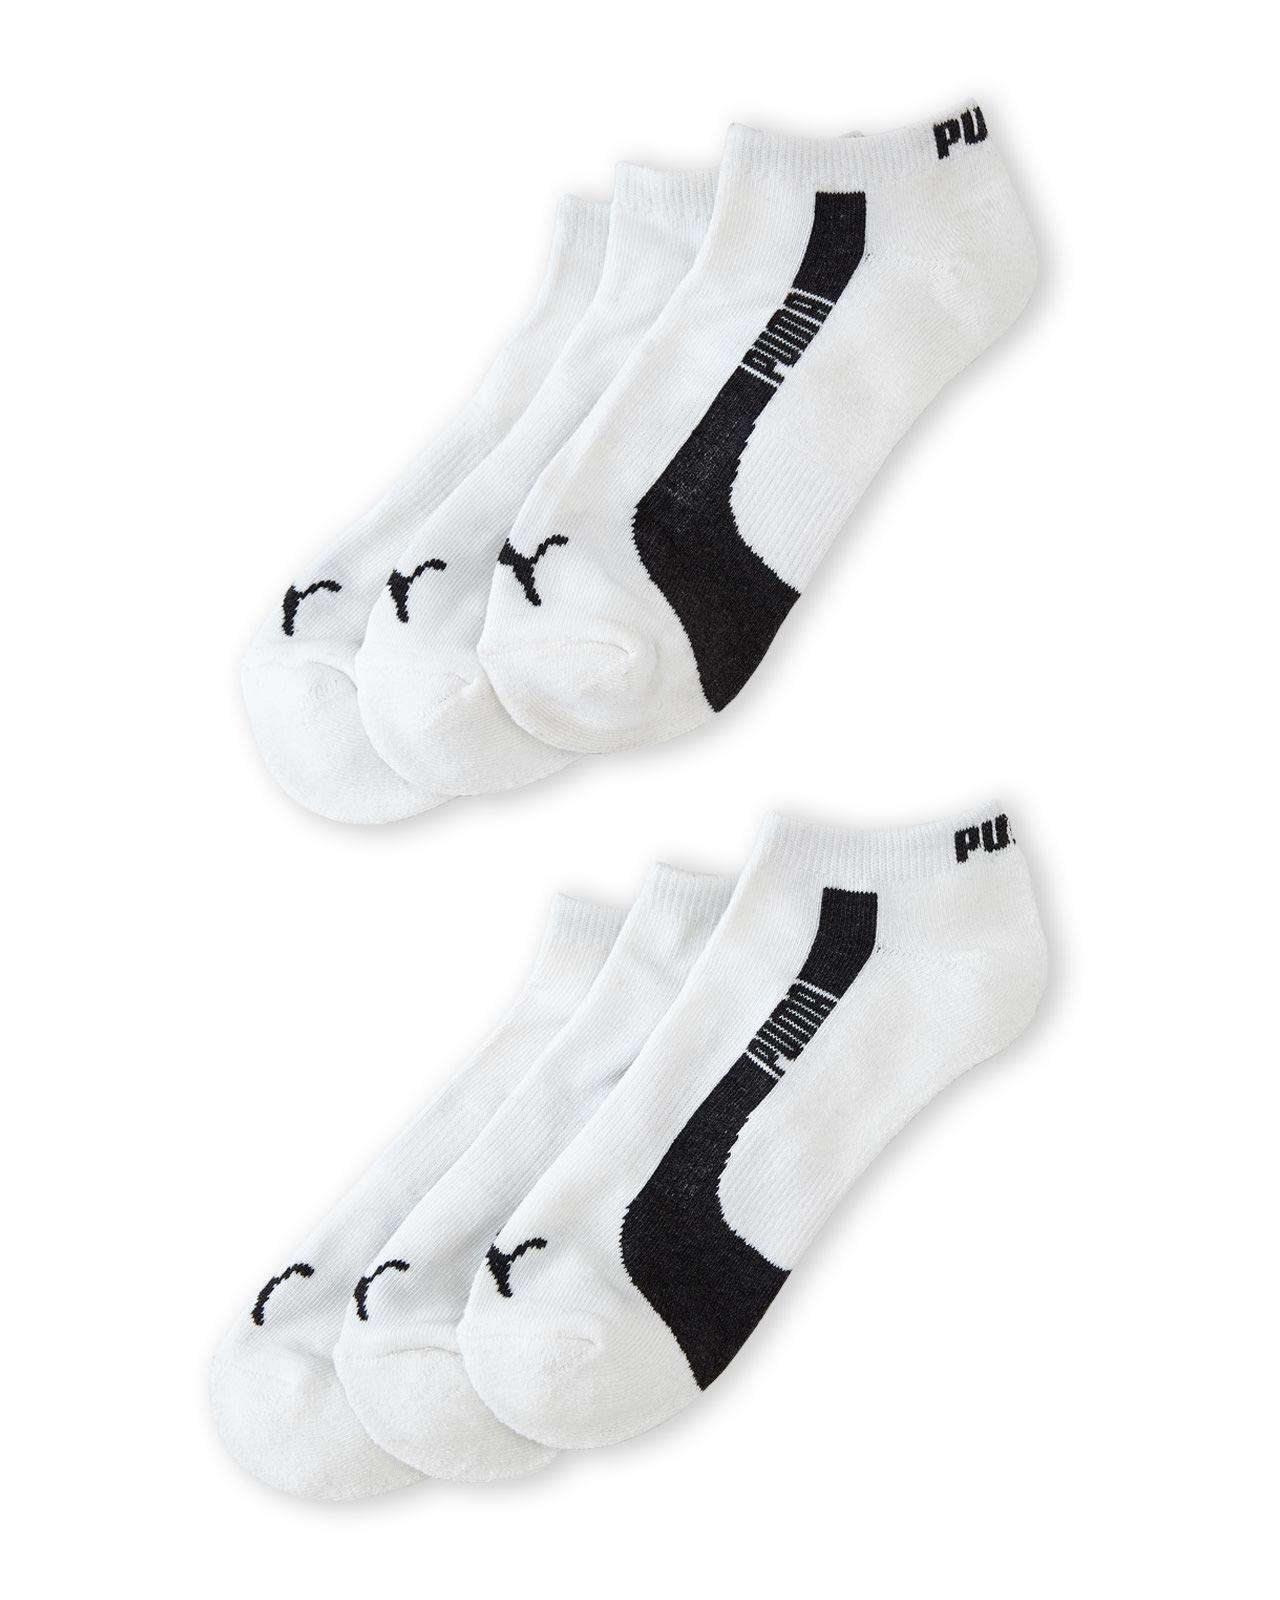 Lyst - Puma 6-Pack Low Cut Ankle Socks in White for Men